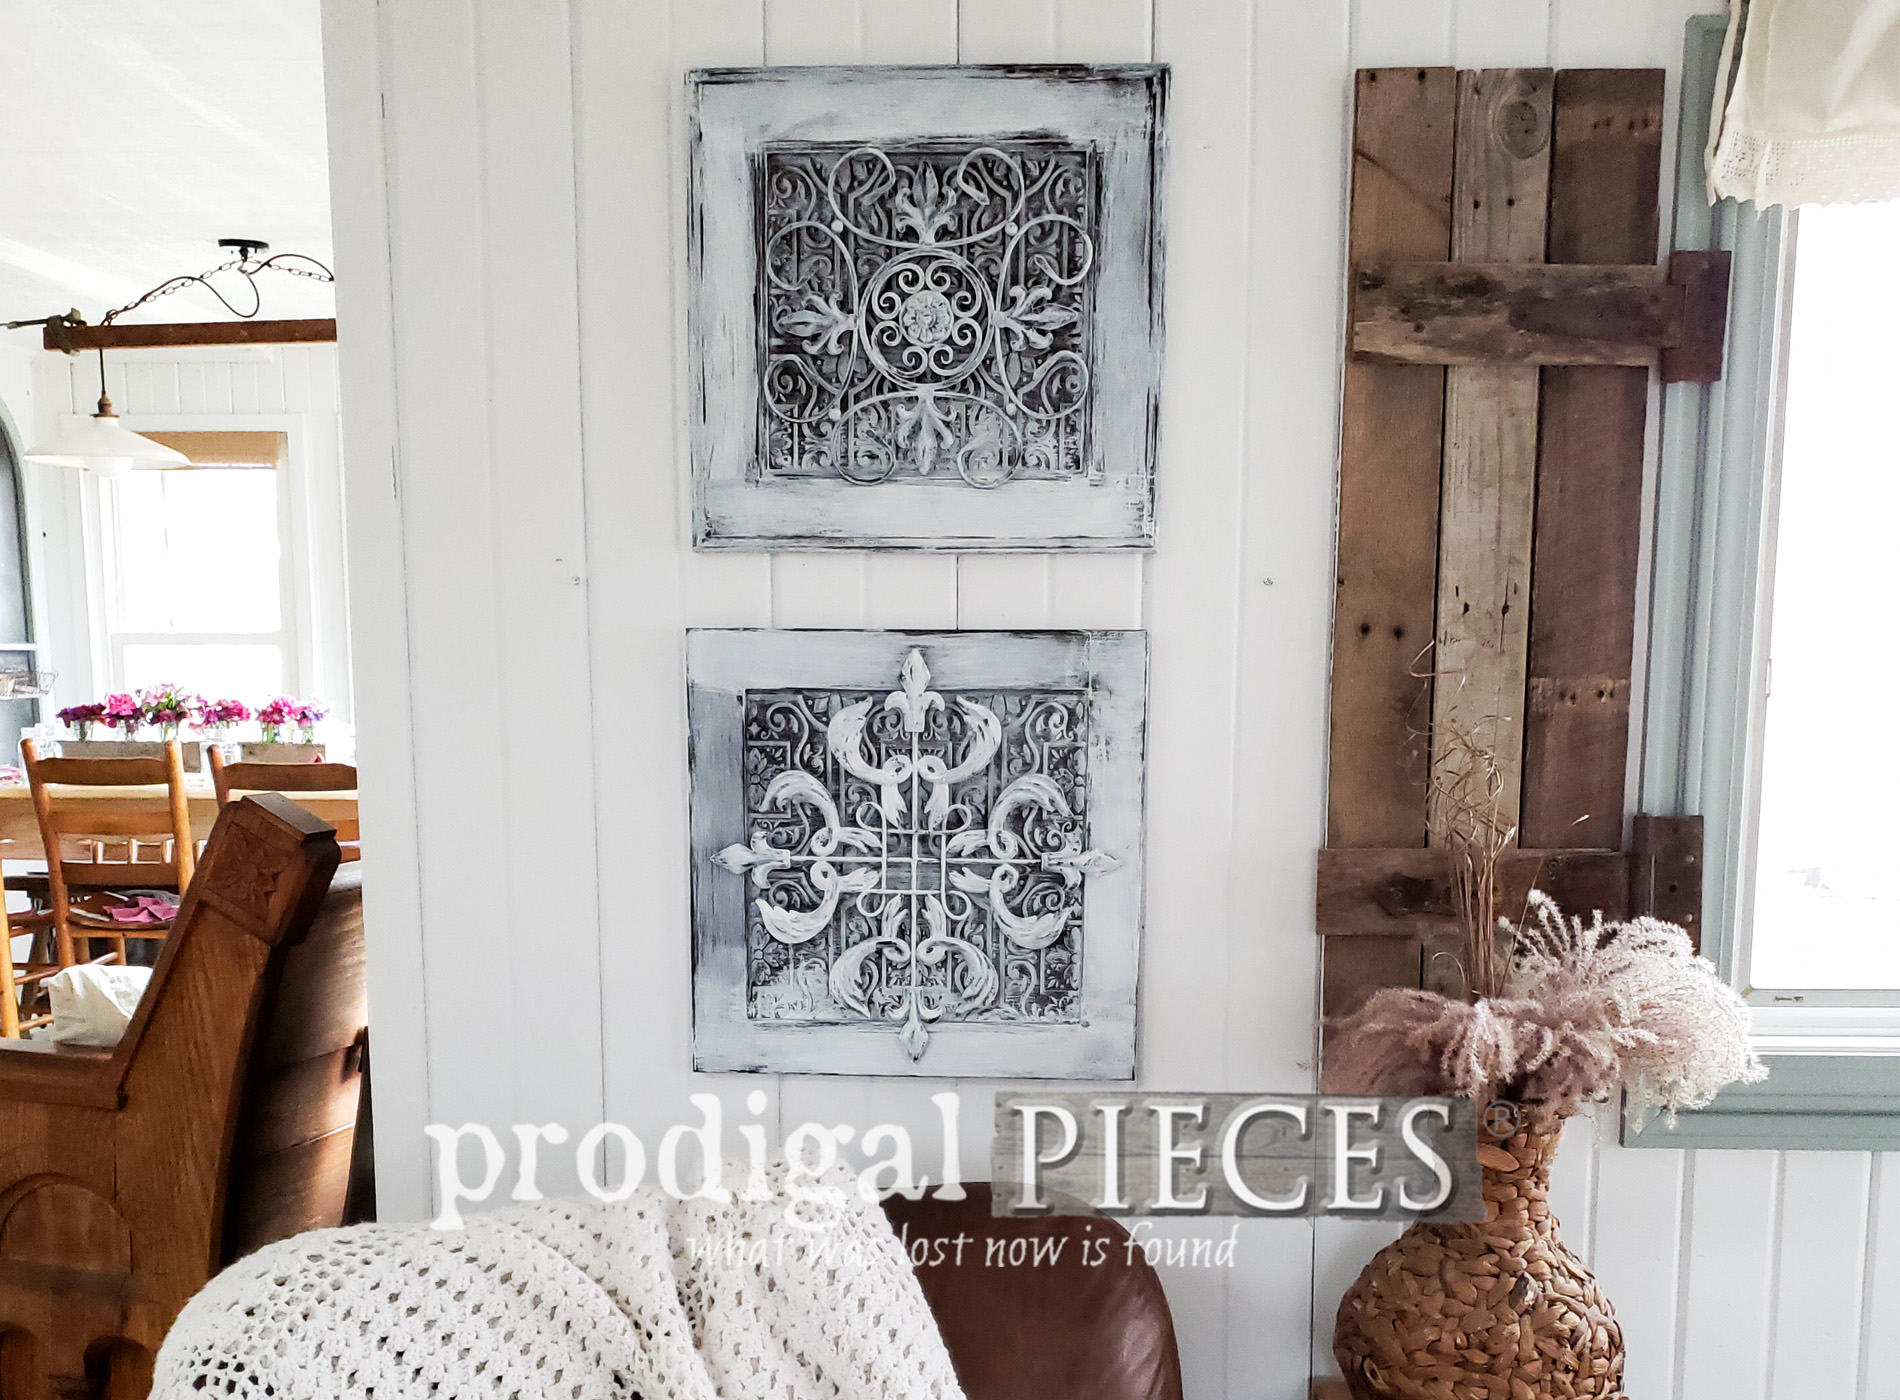 Featured Farmhouse Wall Decor Made from Upcycled Cupboard Doors by Larissa of Prodigal Pieces | prodigalpieces.com #prodigalpieces #diy #home #farmhouse #homedecor #handmade